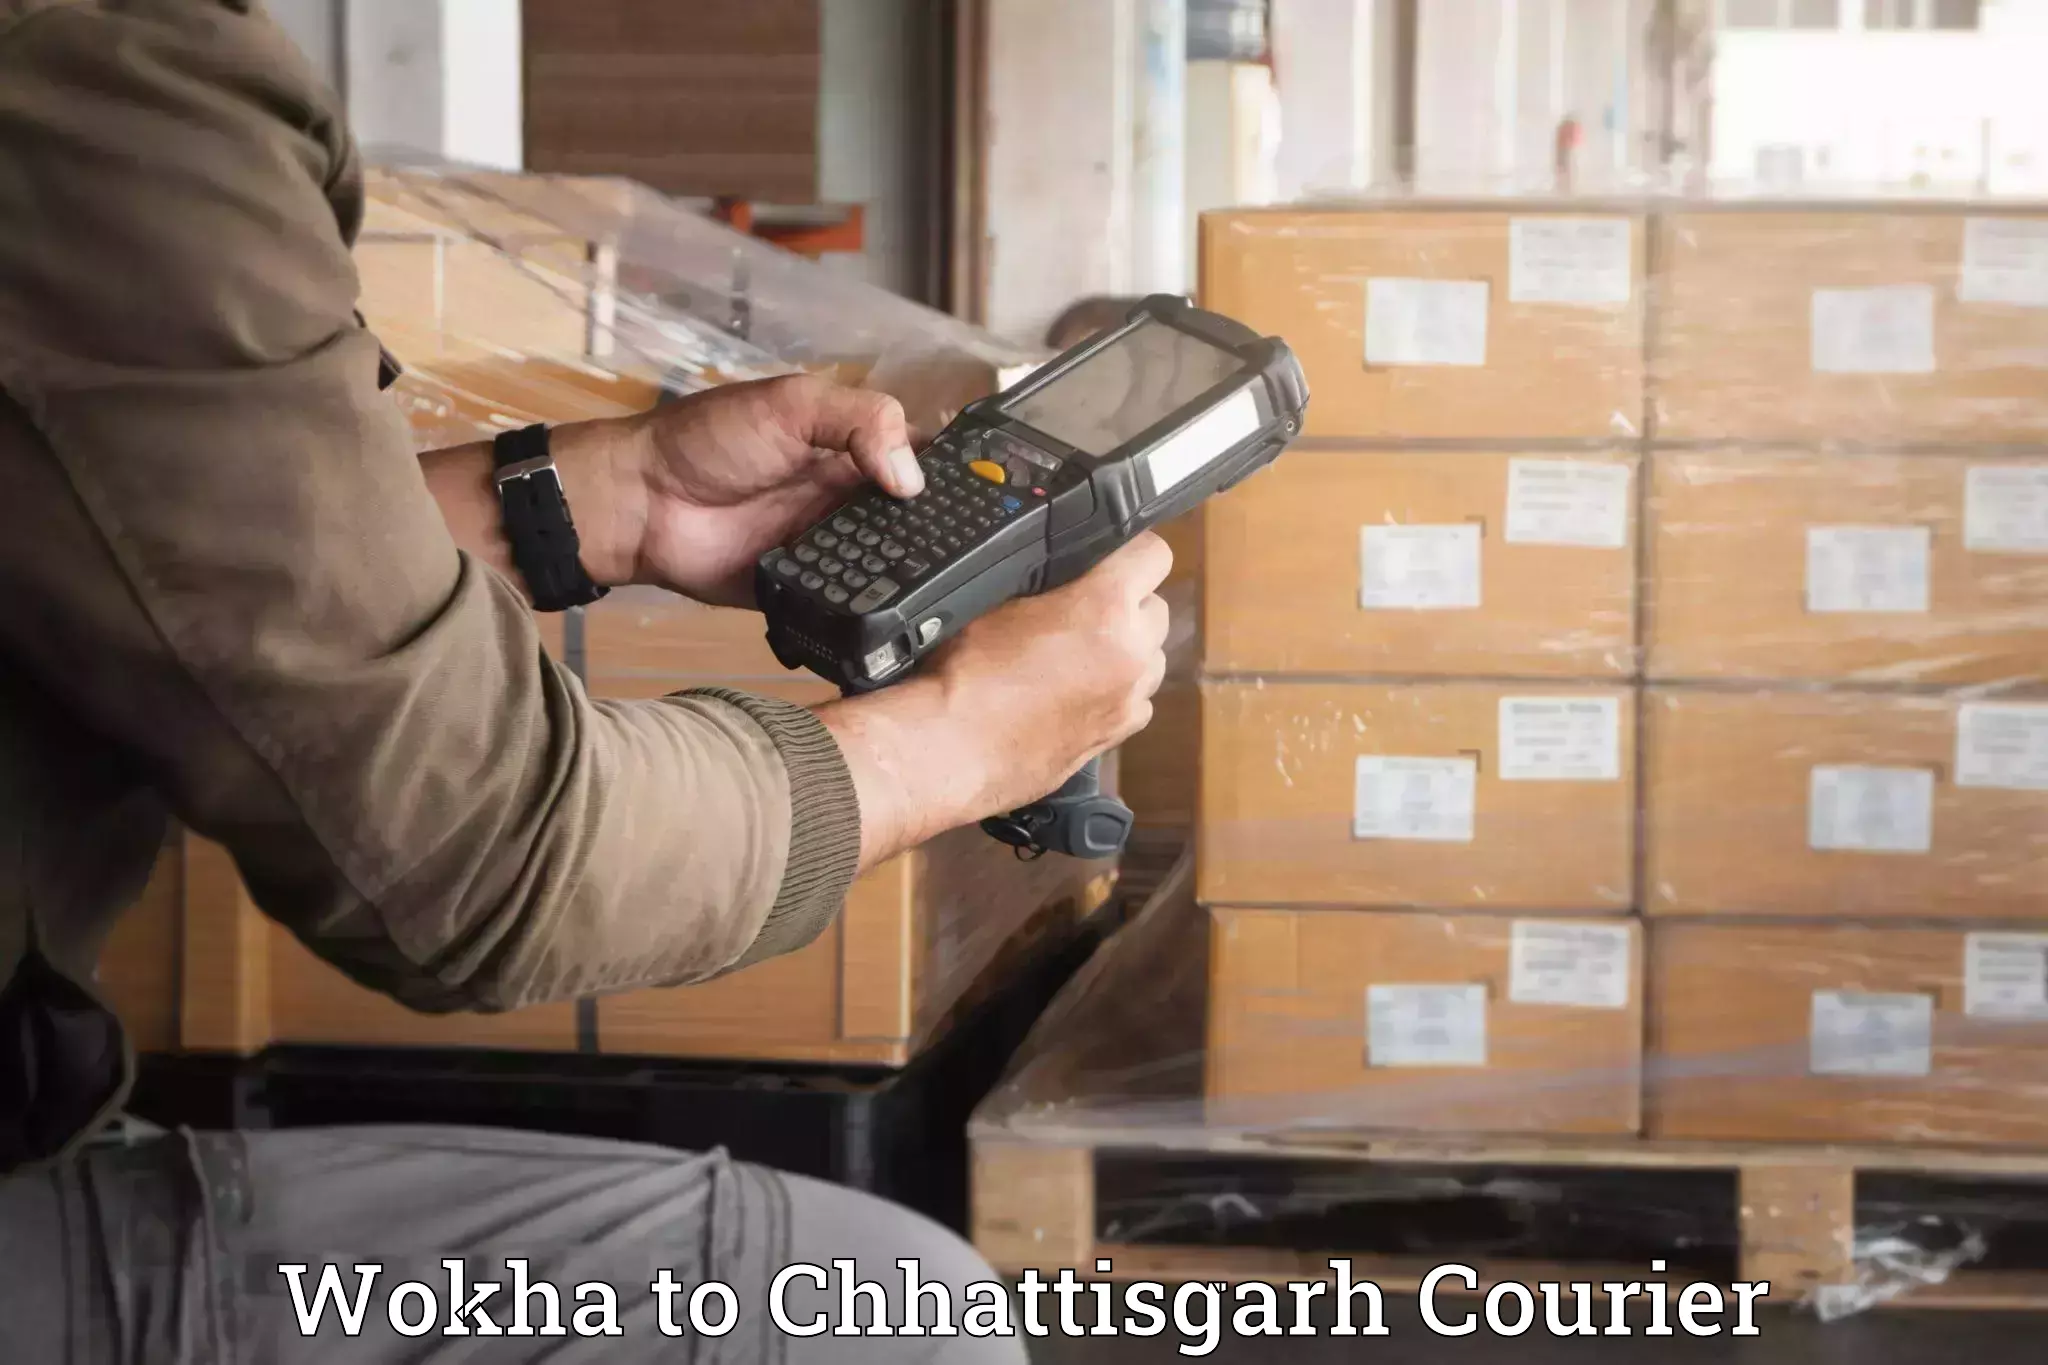 Professional movers and packers Wokha to Raigarh